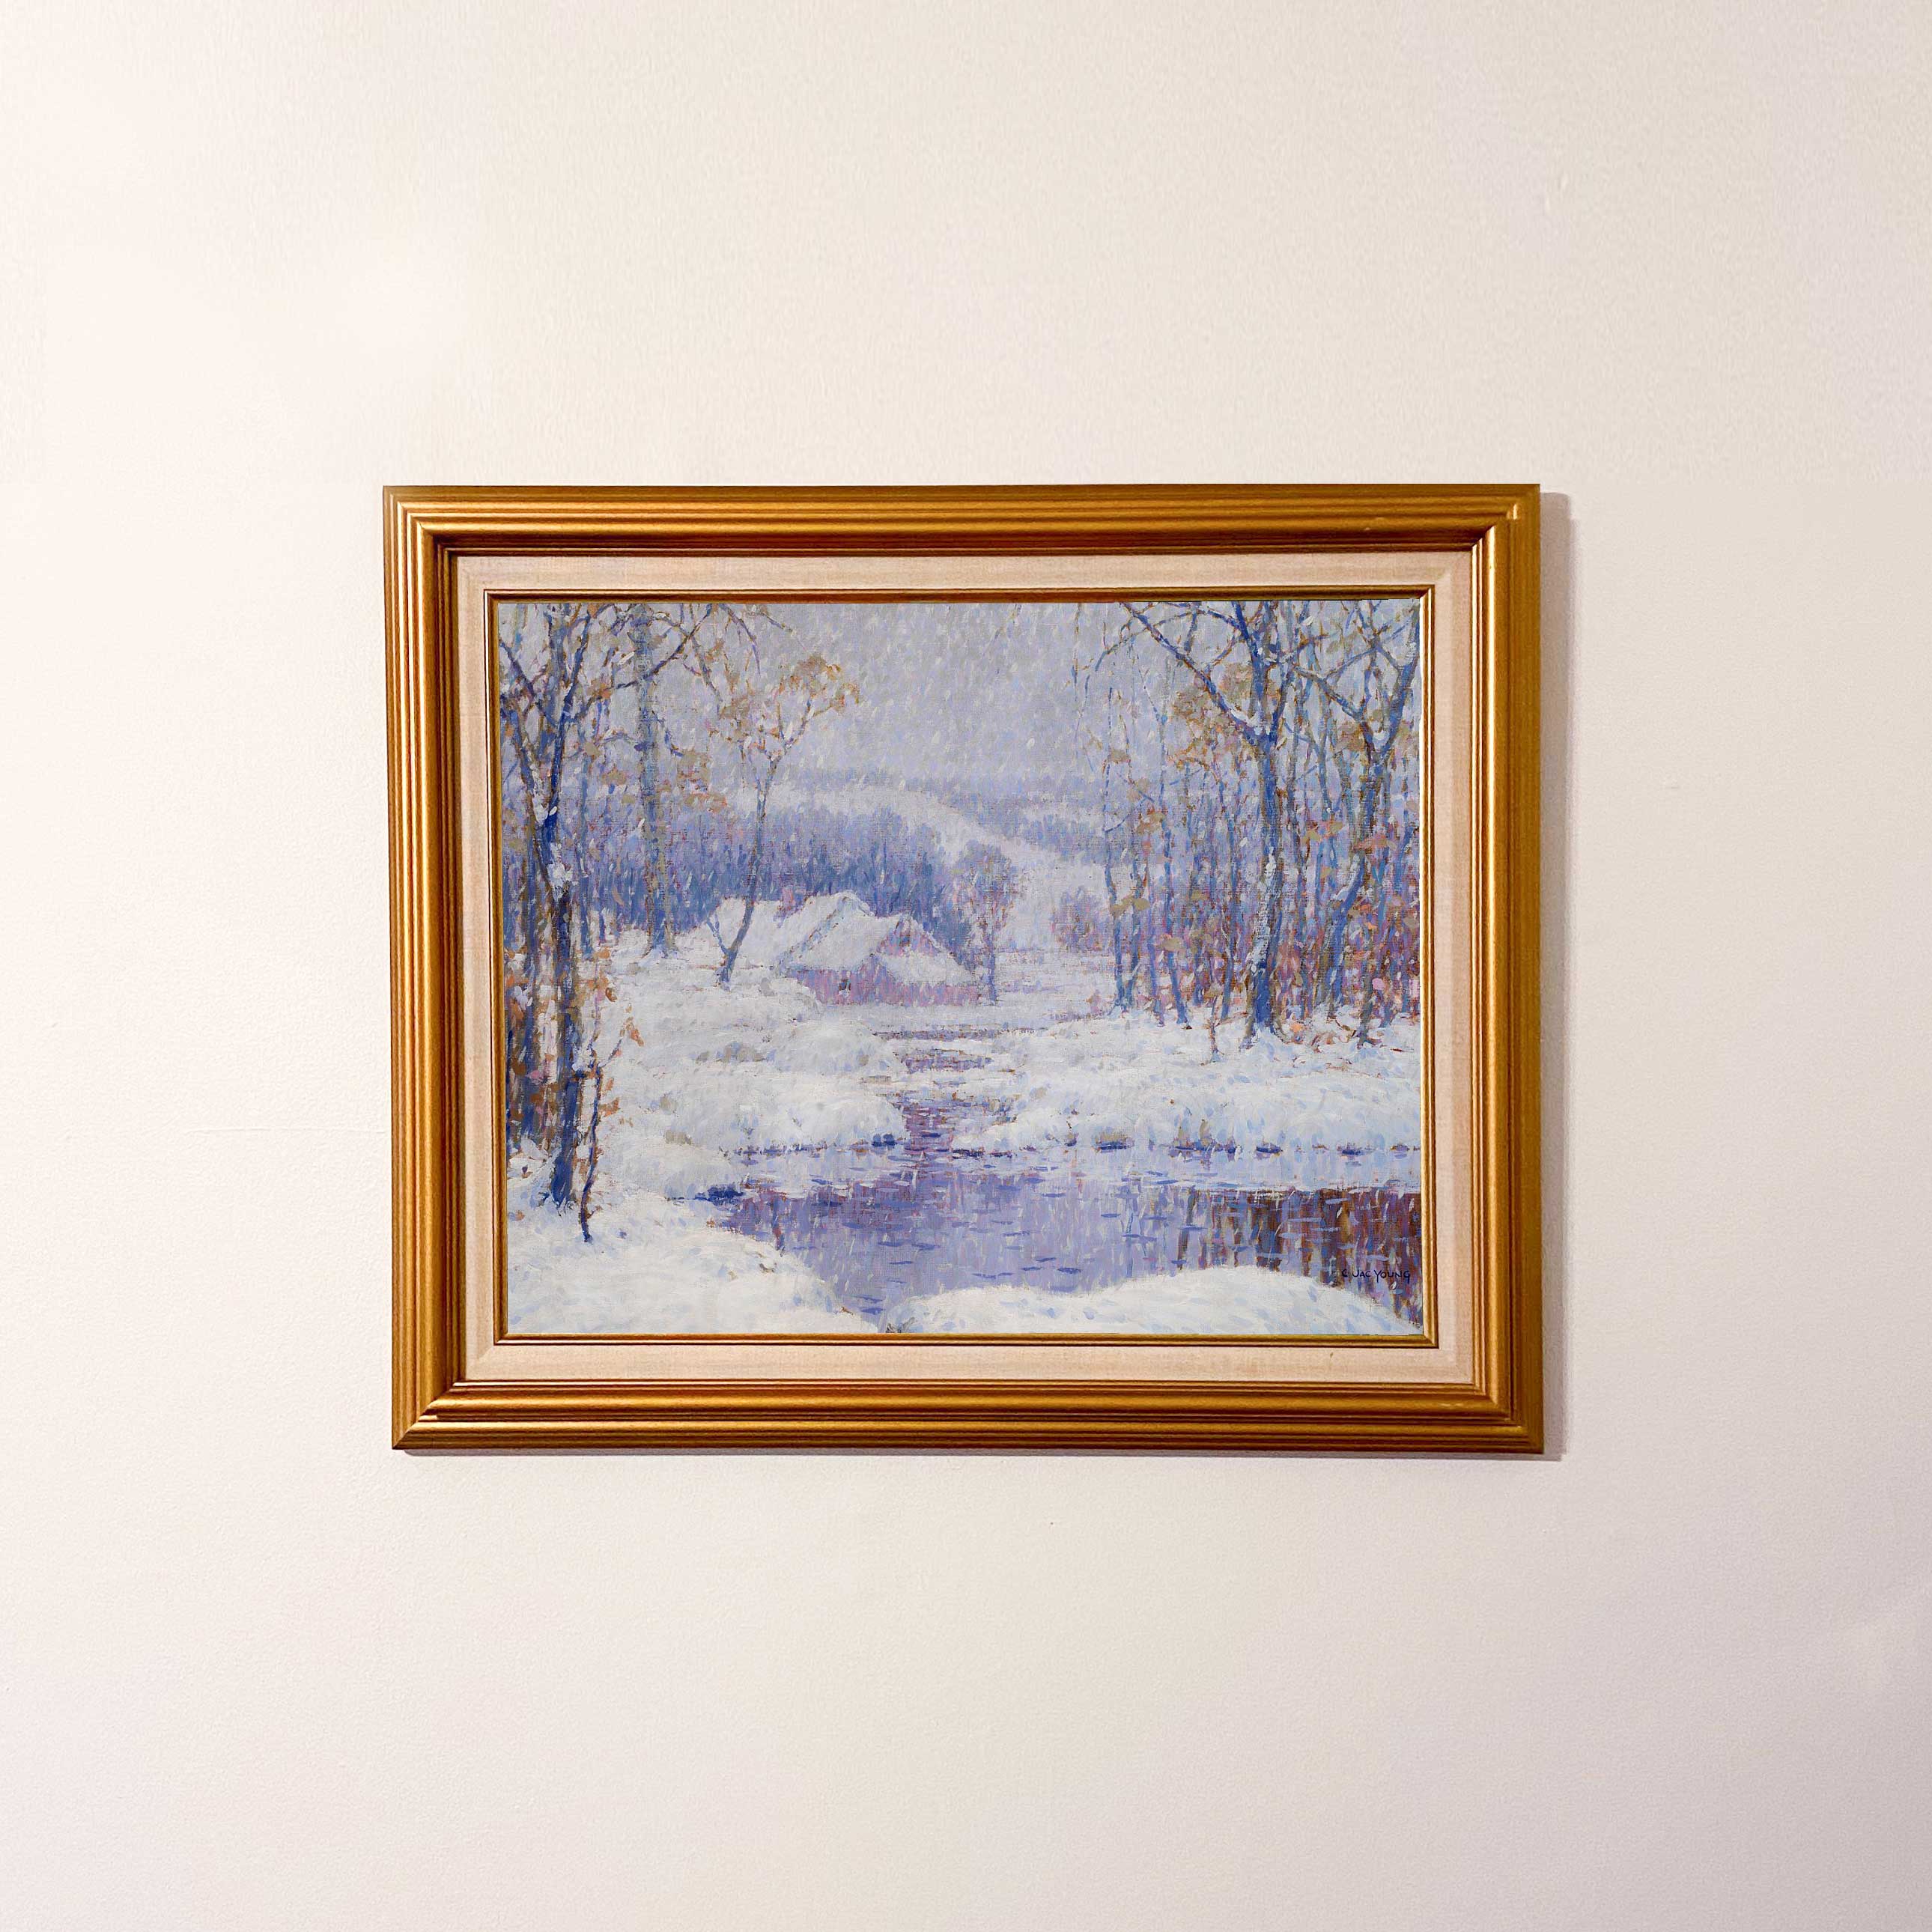 Capturing a quiet moment, this artwork takes one on a peaceful walk over the river, into wintry forest and towards a cozy farmhouse. 